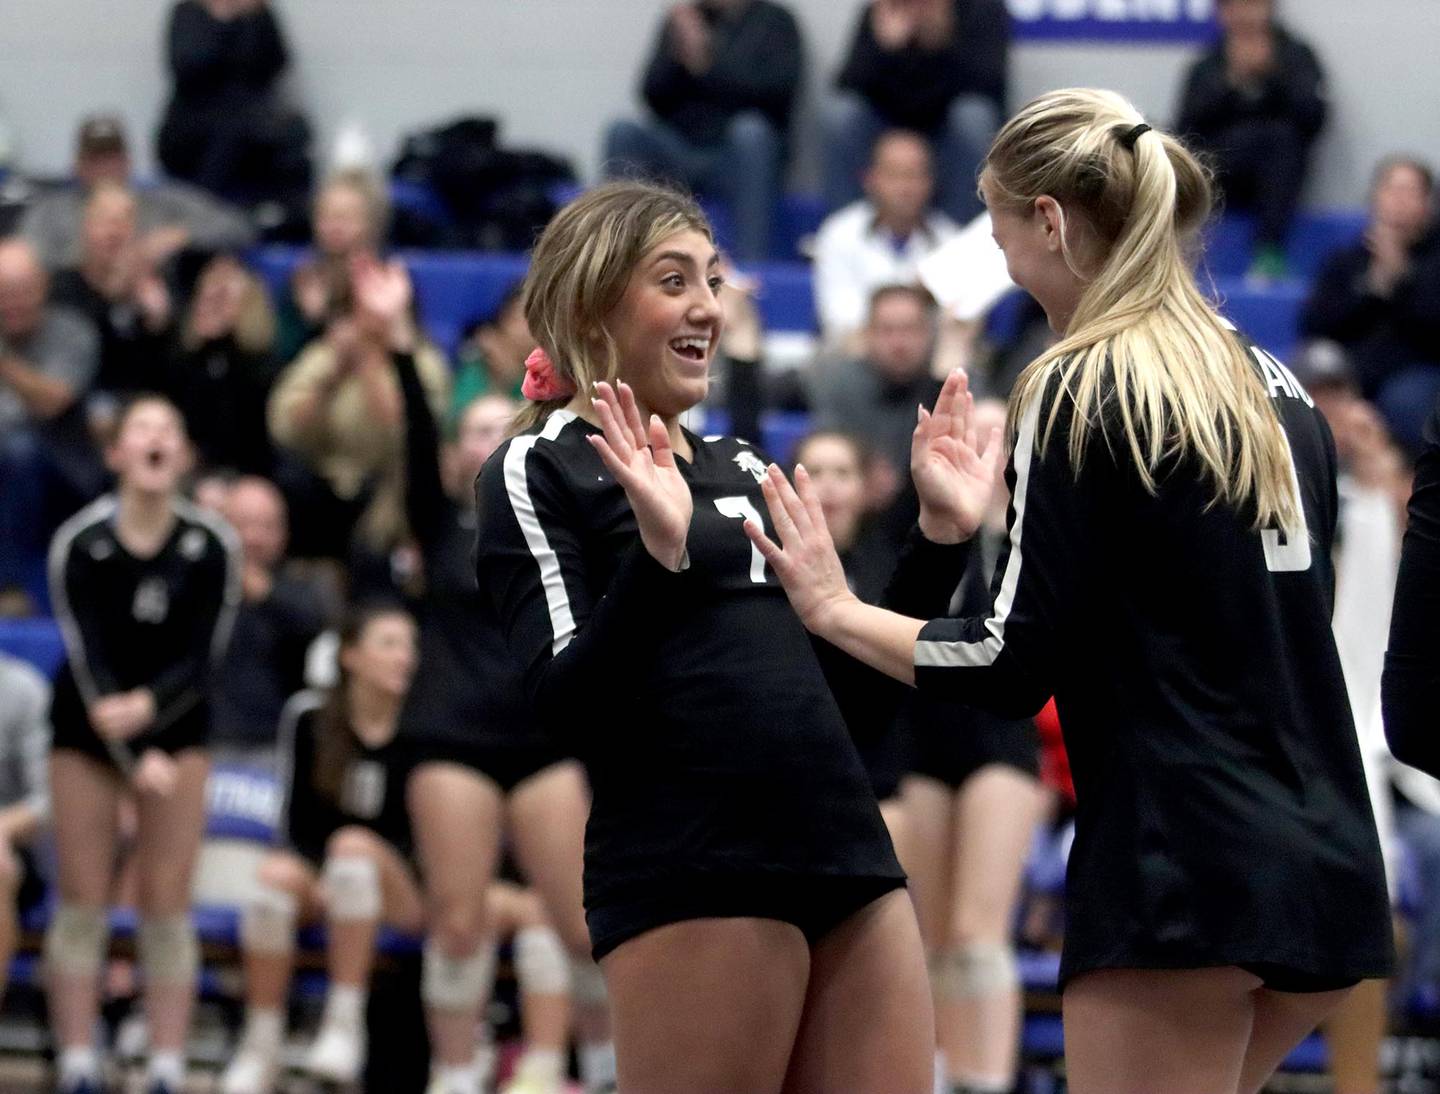 Kaneland’s Frankie Brandonisio, left, celebrates with Meredith Milz late in a two-set win over Prairie Ridge in Class 3A volleyball sectional action at Burlington Central on Monday.